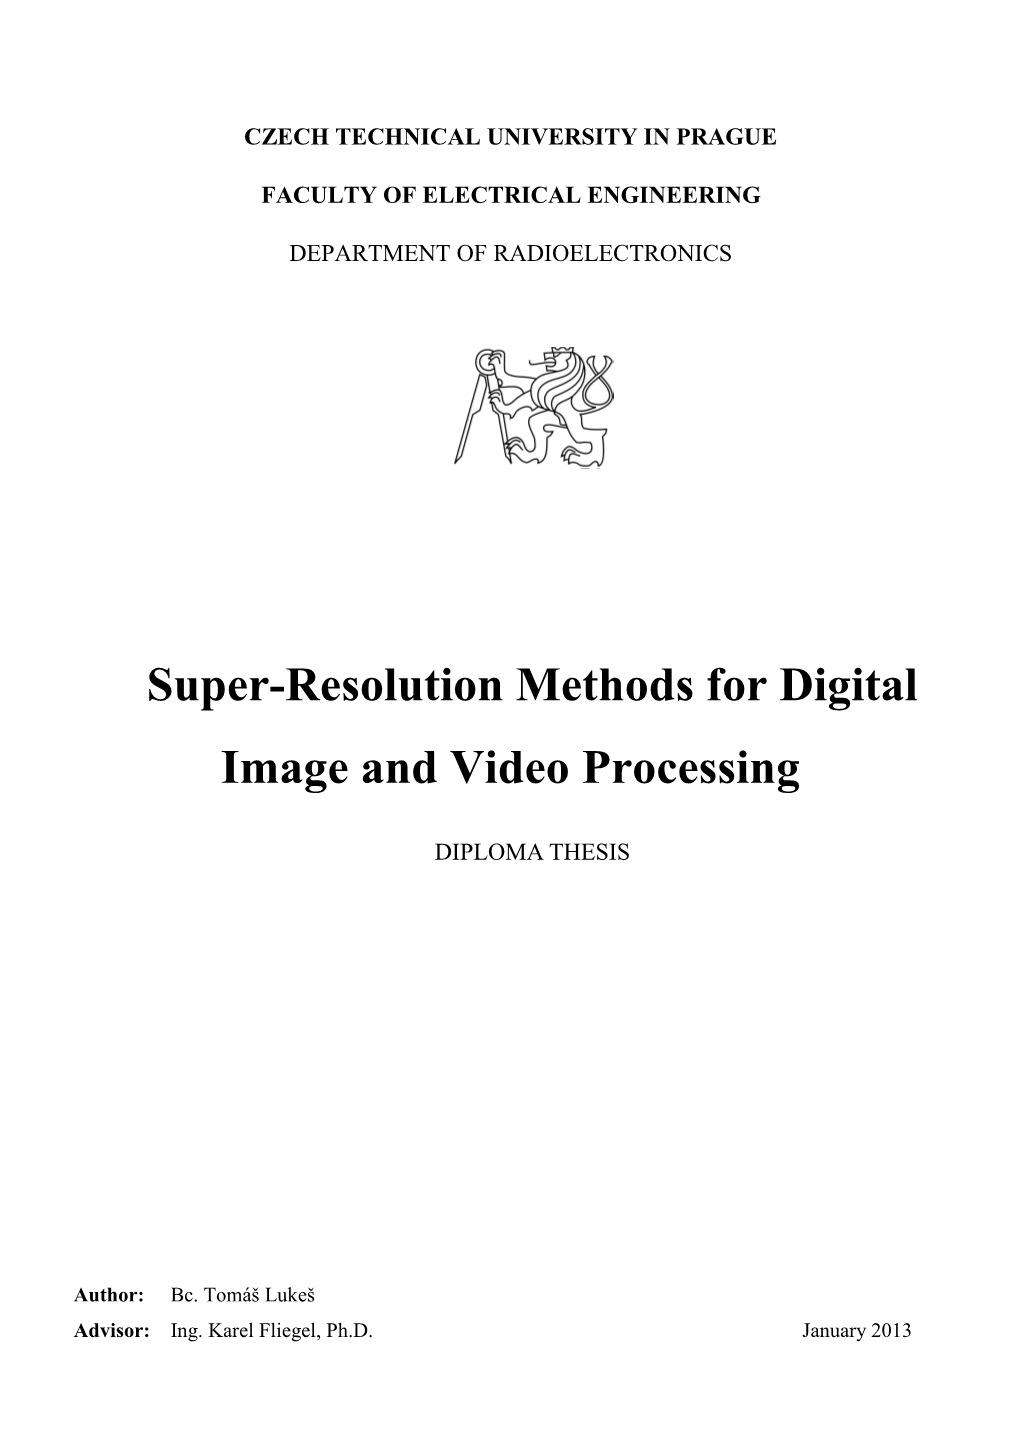 Super-Resolution Methods for Digital Image and Video Processing